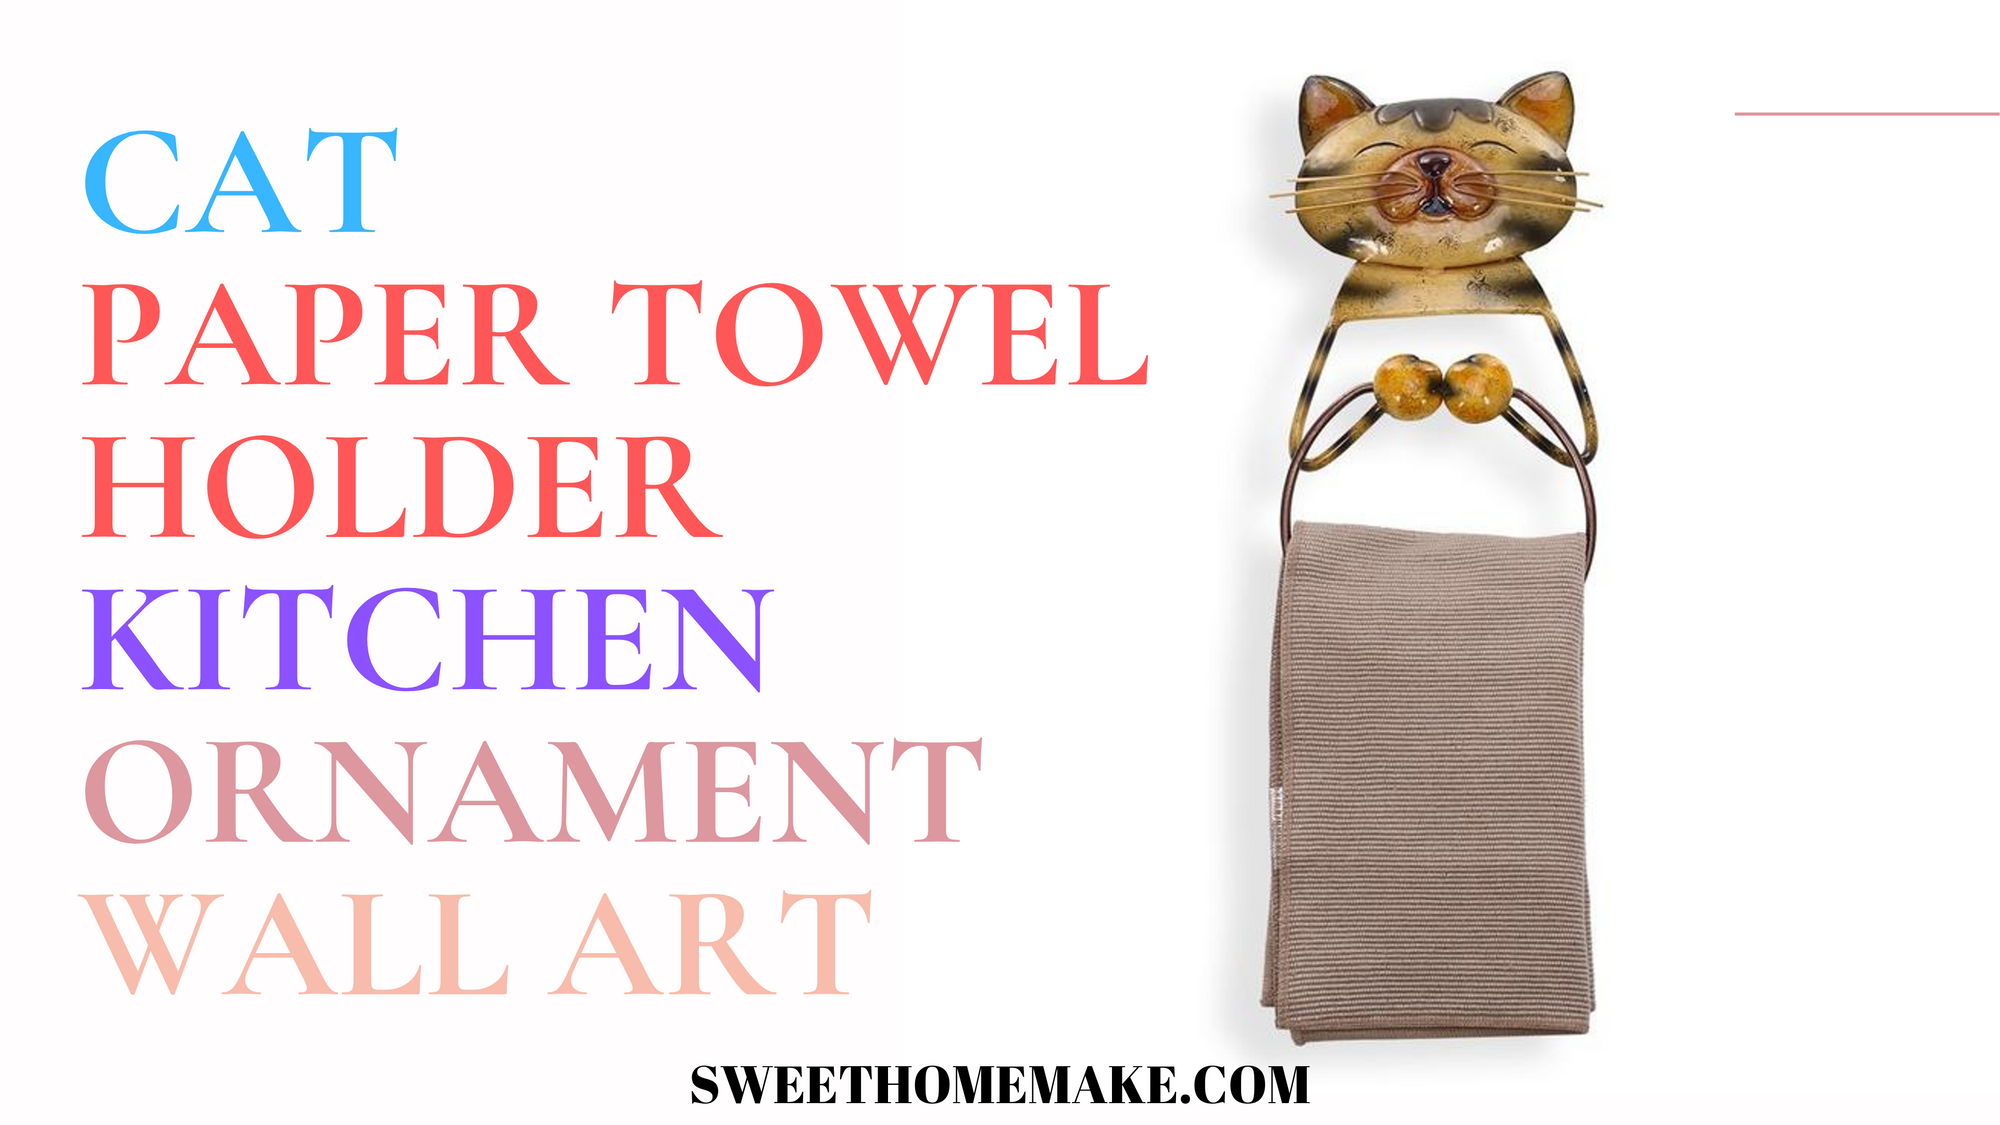 Wall Mount Paper Towel Holder by Cat Ornaments Metal Wall Art